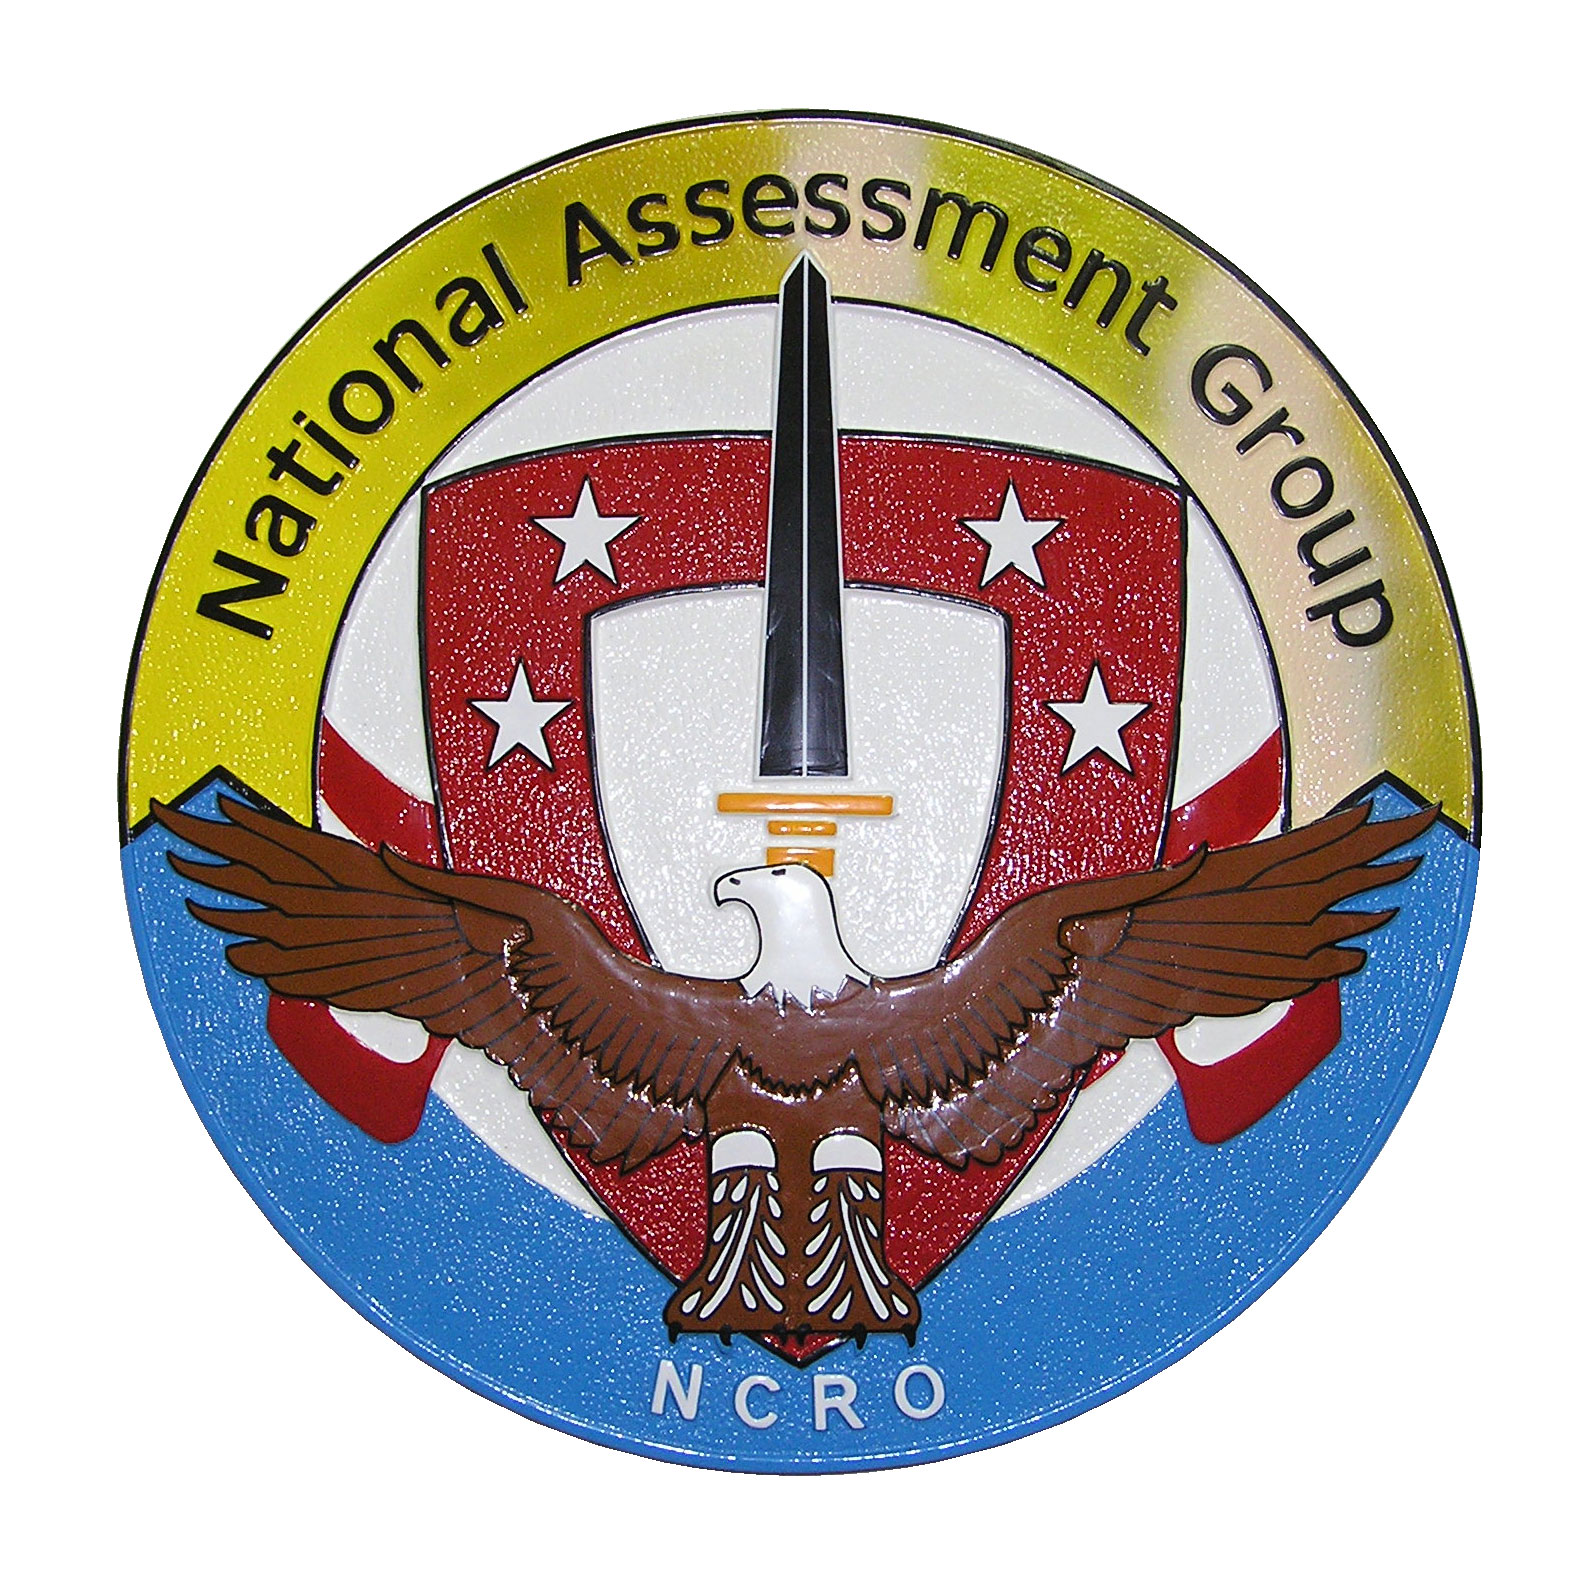 National Assessment Group Seal